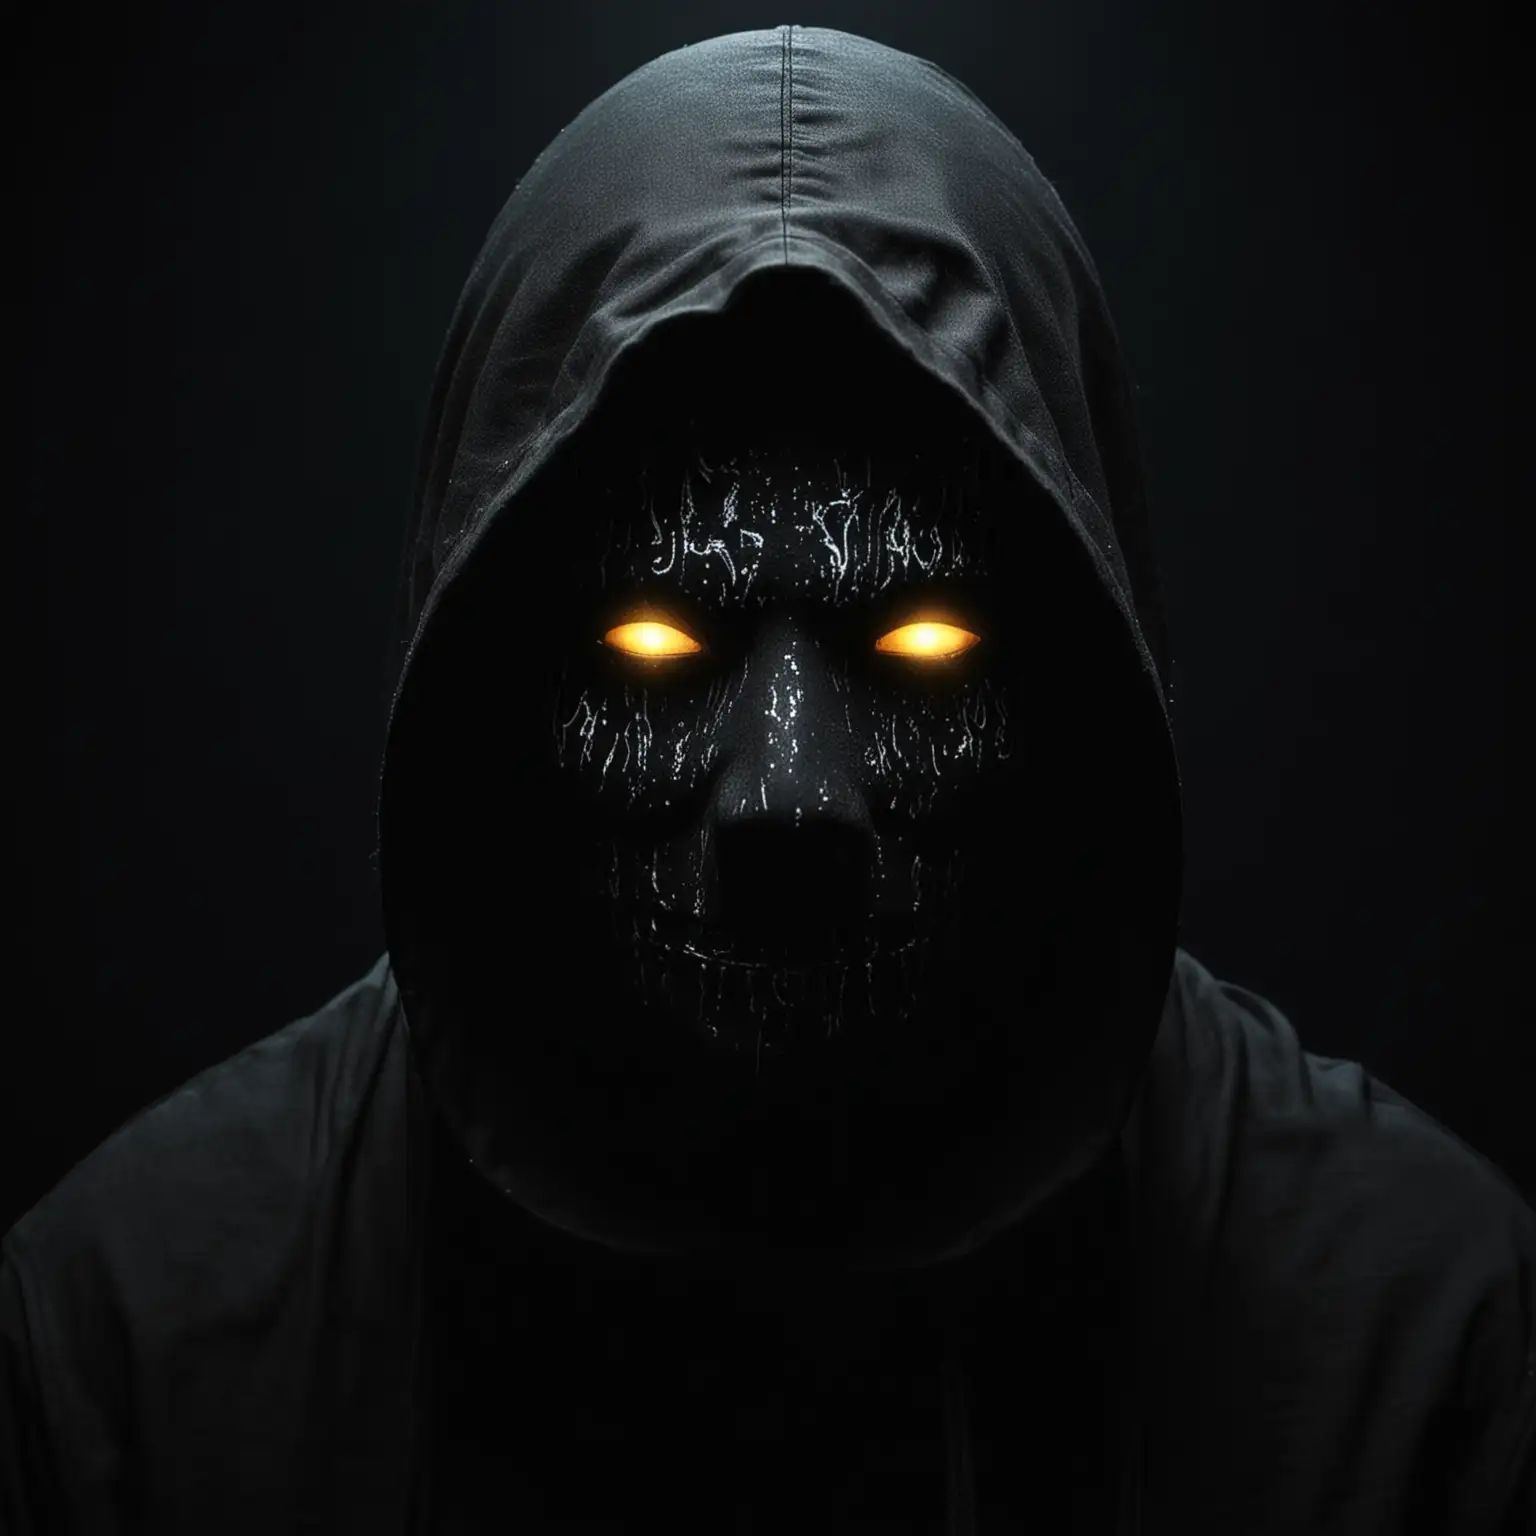 Hooded Figure with Glowing Eyes in the Darkness